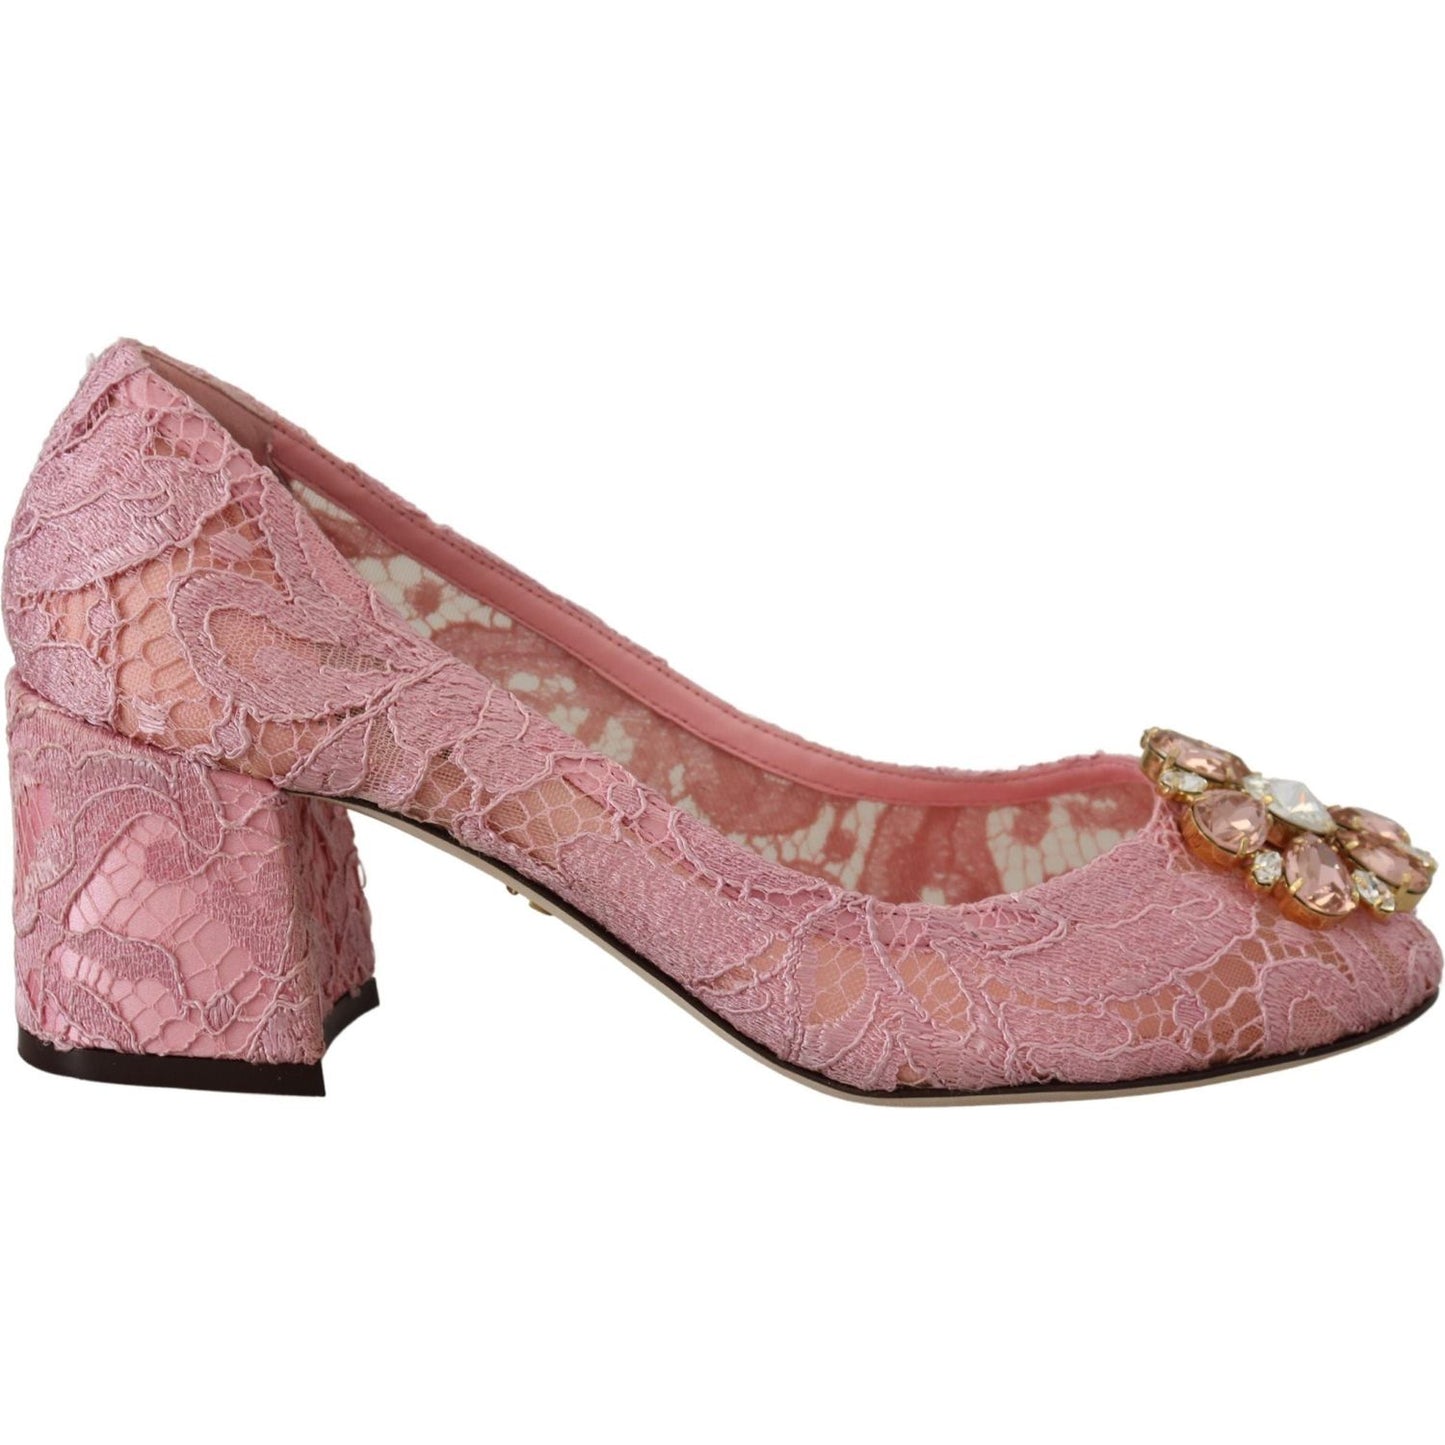 Dolce & Gabbana Pastel Pink Lace Crystal Embellished Pumps pink-taormina-lace-crystal-pumps-pastel-shoes